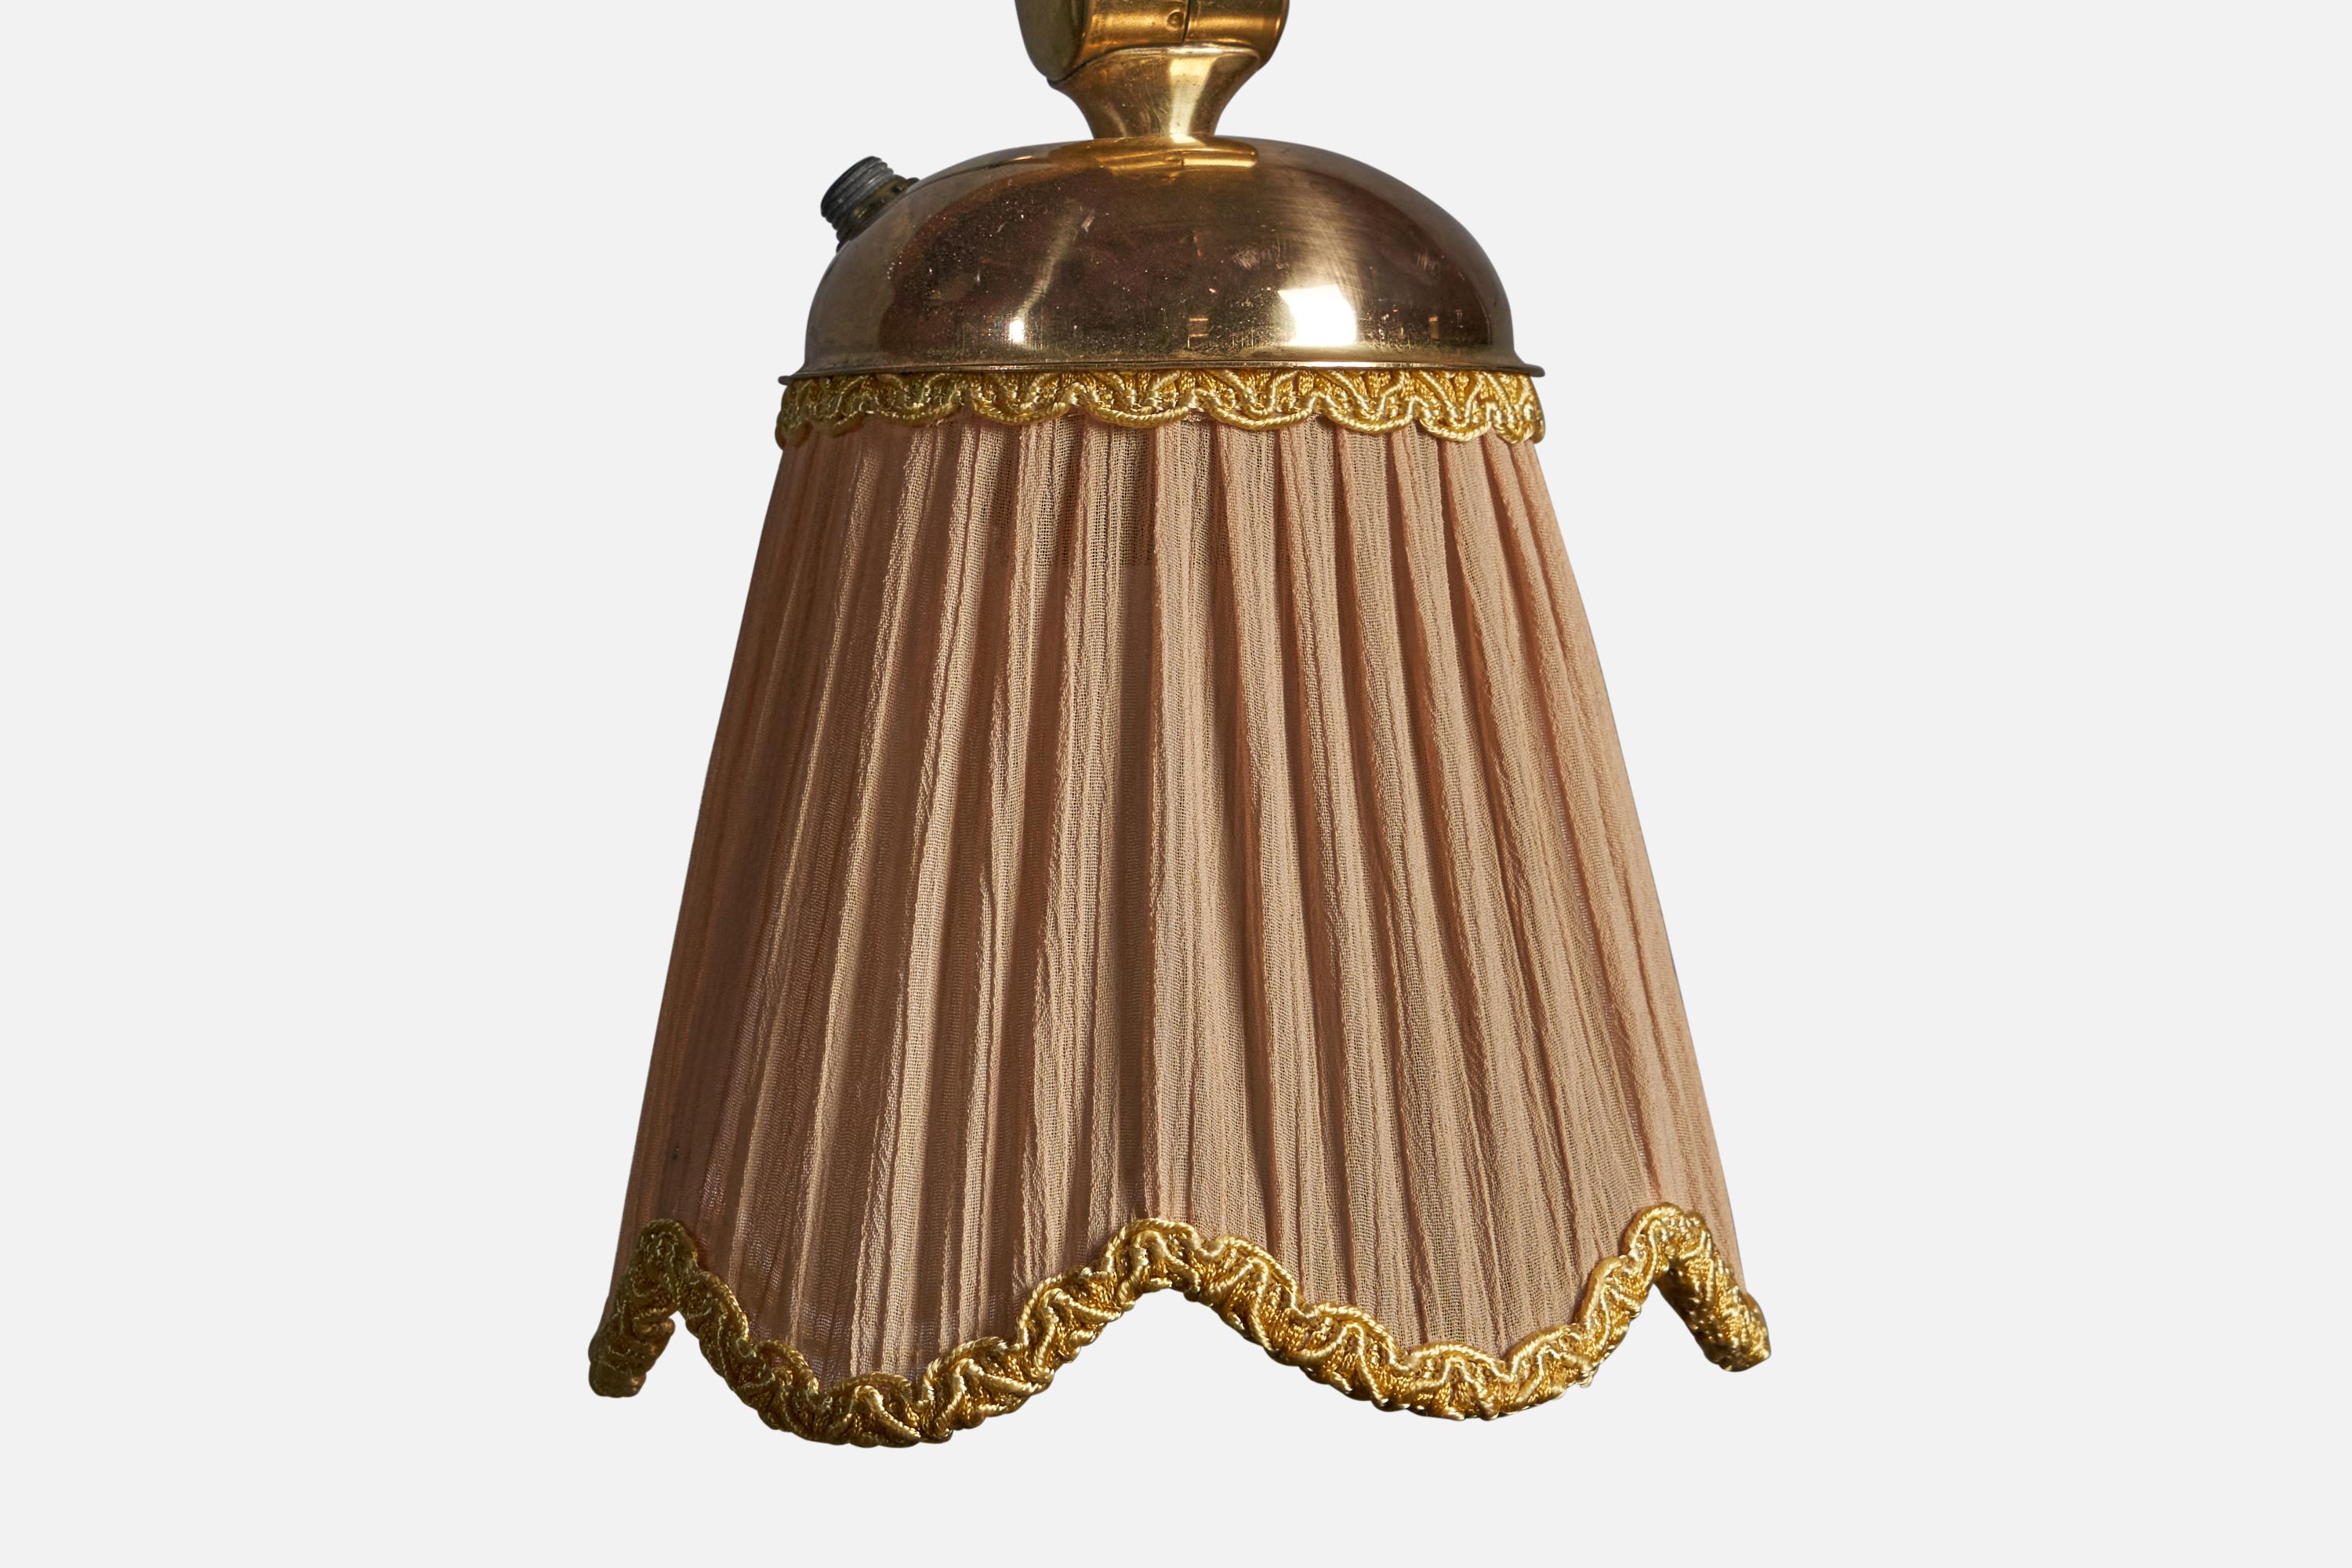 An adjustable brass and beige fabric wall light with telescopic arm, designed and produced in Sweden c. 1940s.

Overall Dimensions (inches): 9